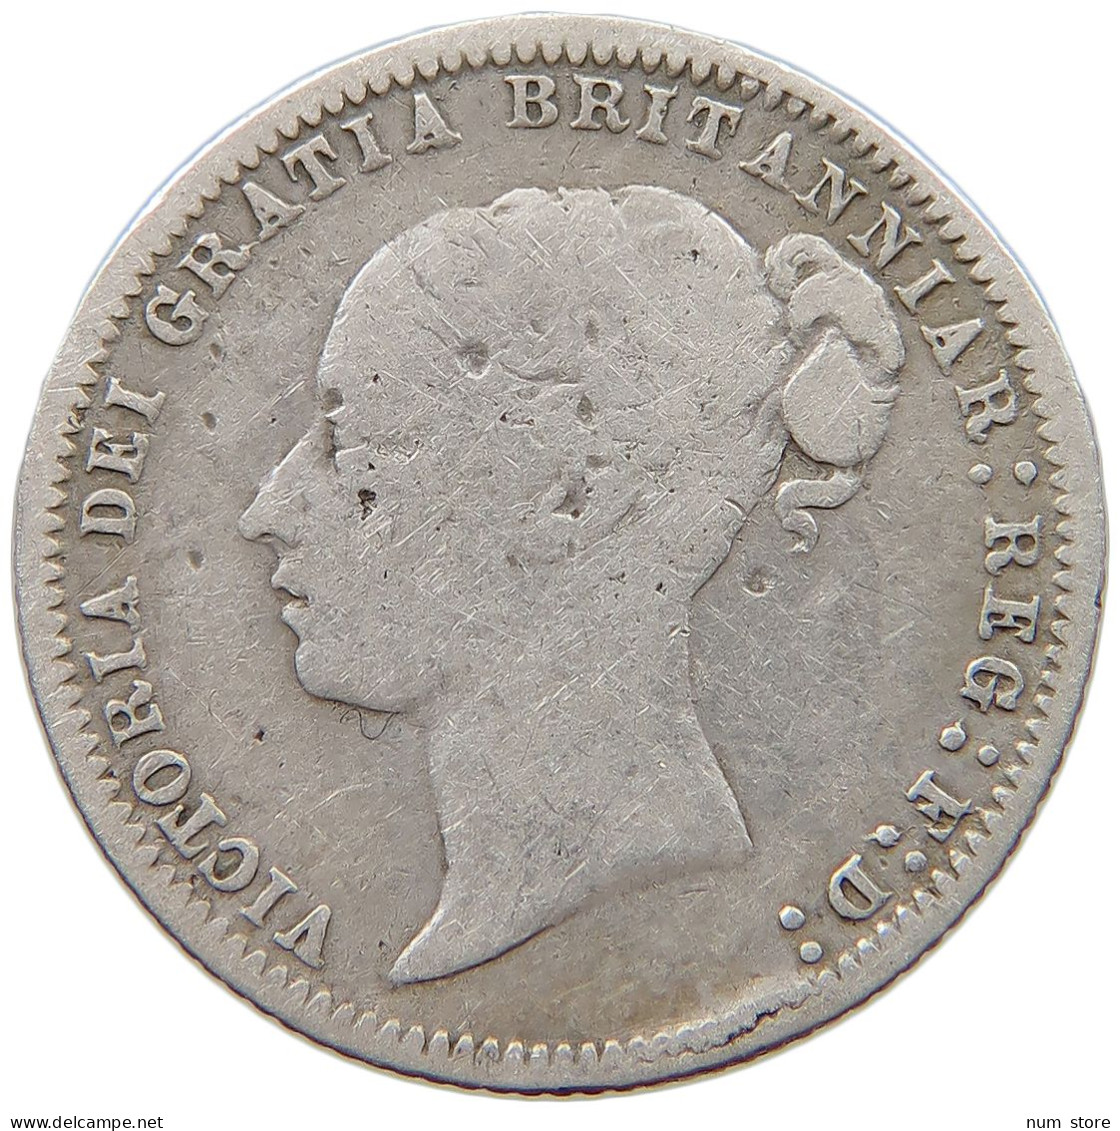 GREAT BRITAIN SIXPENCE 1877 Victoria 1837-1901 #s038 0579 - H. 6 Pence